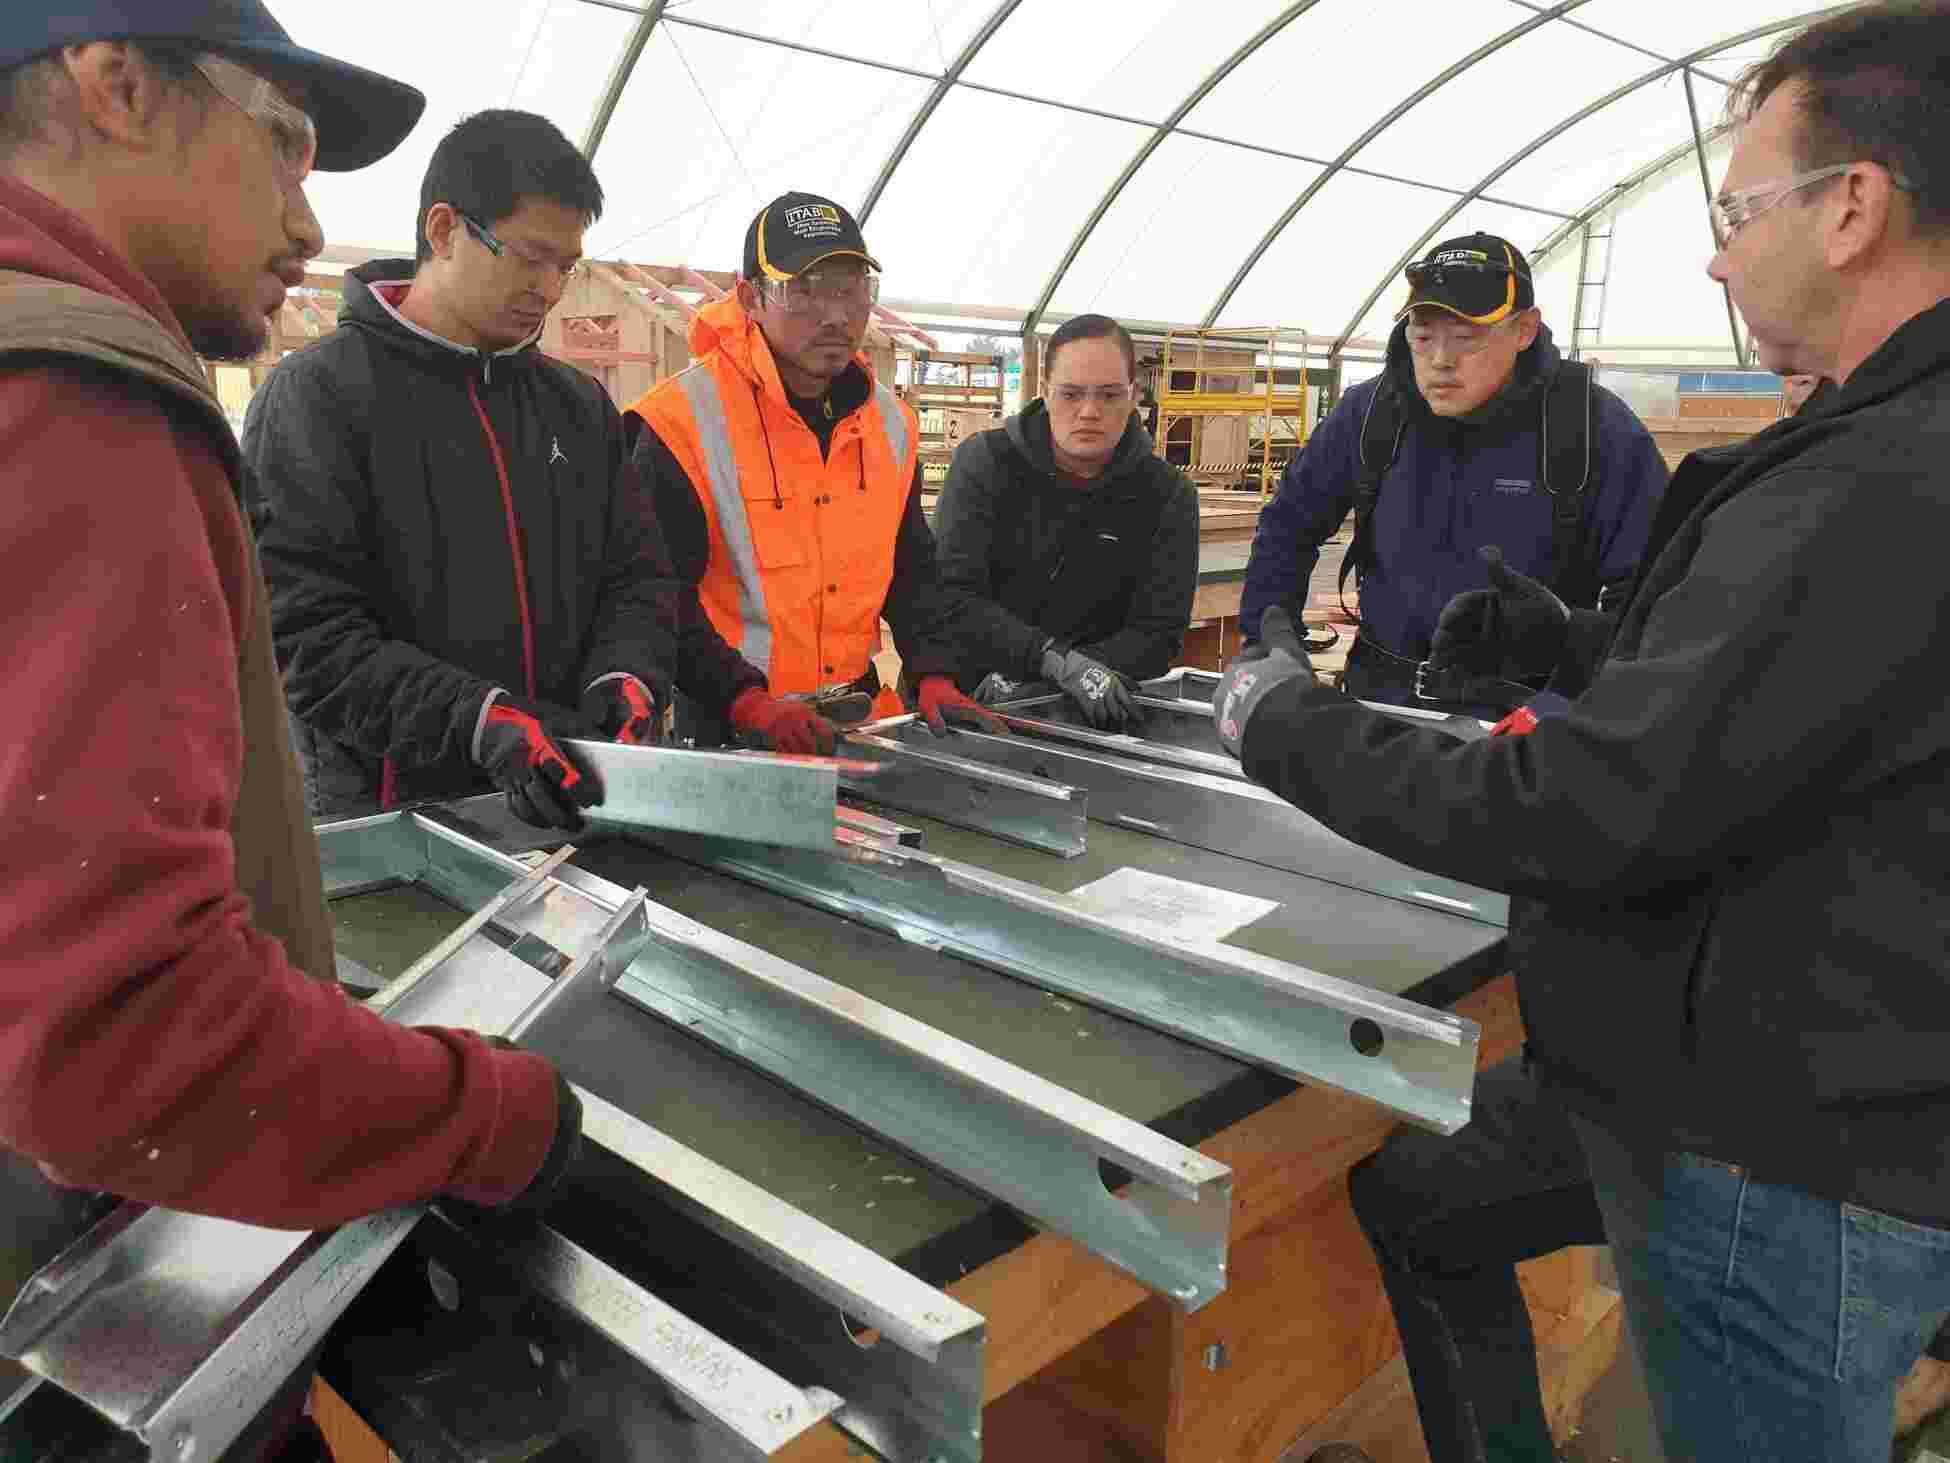 Wintec’s carpentry students eye-opening day assembling steel framing